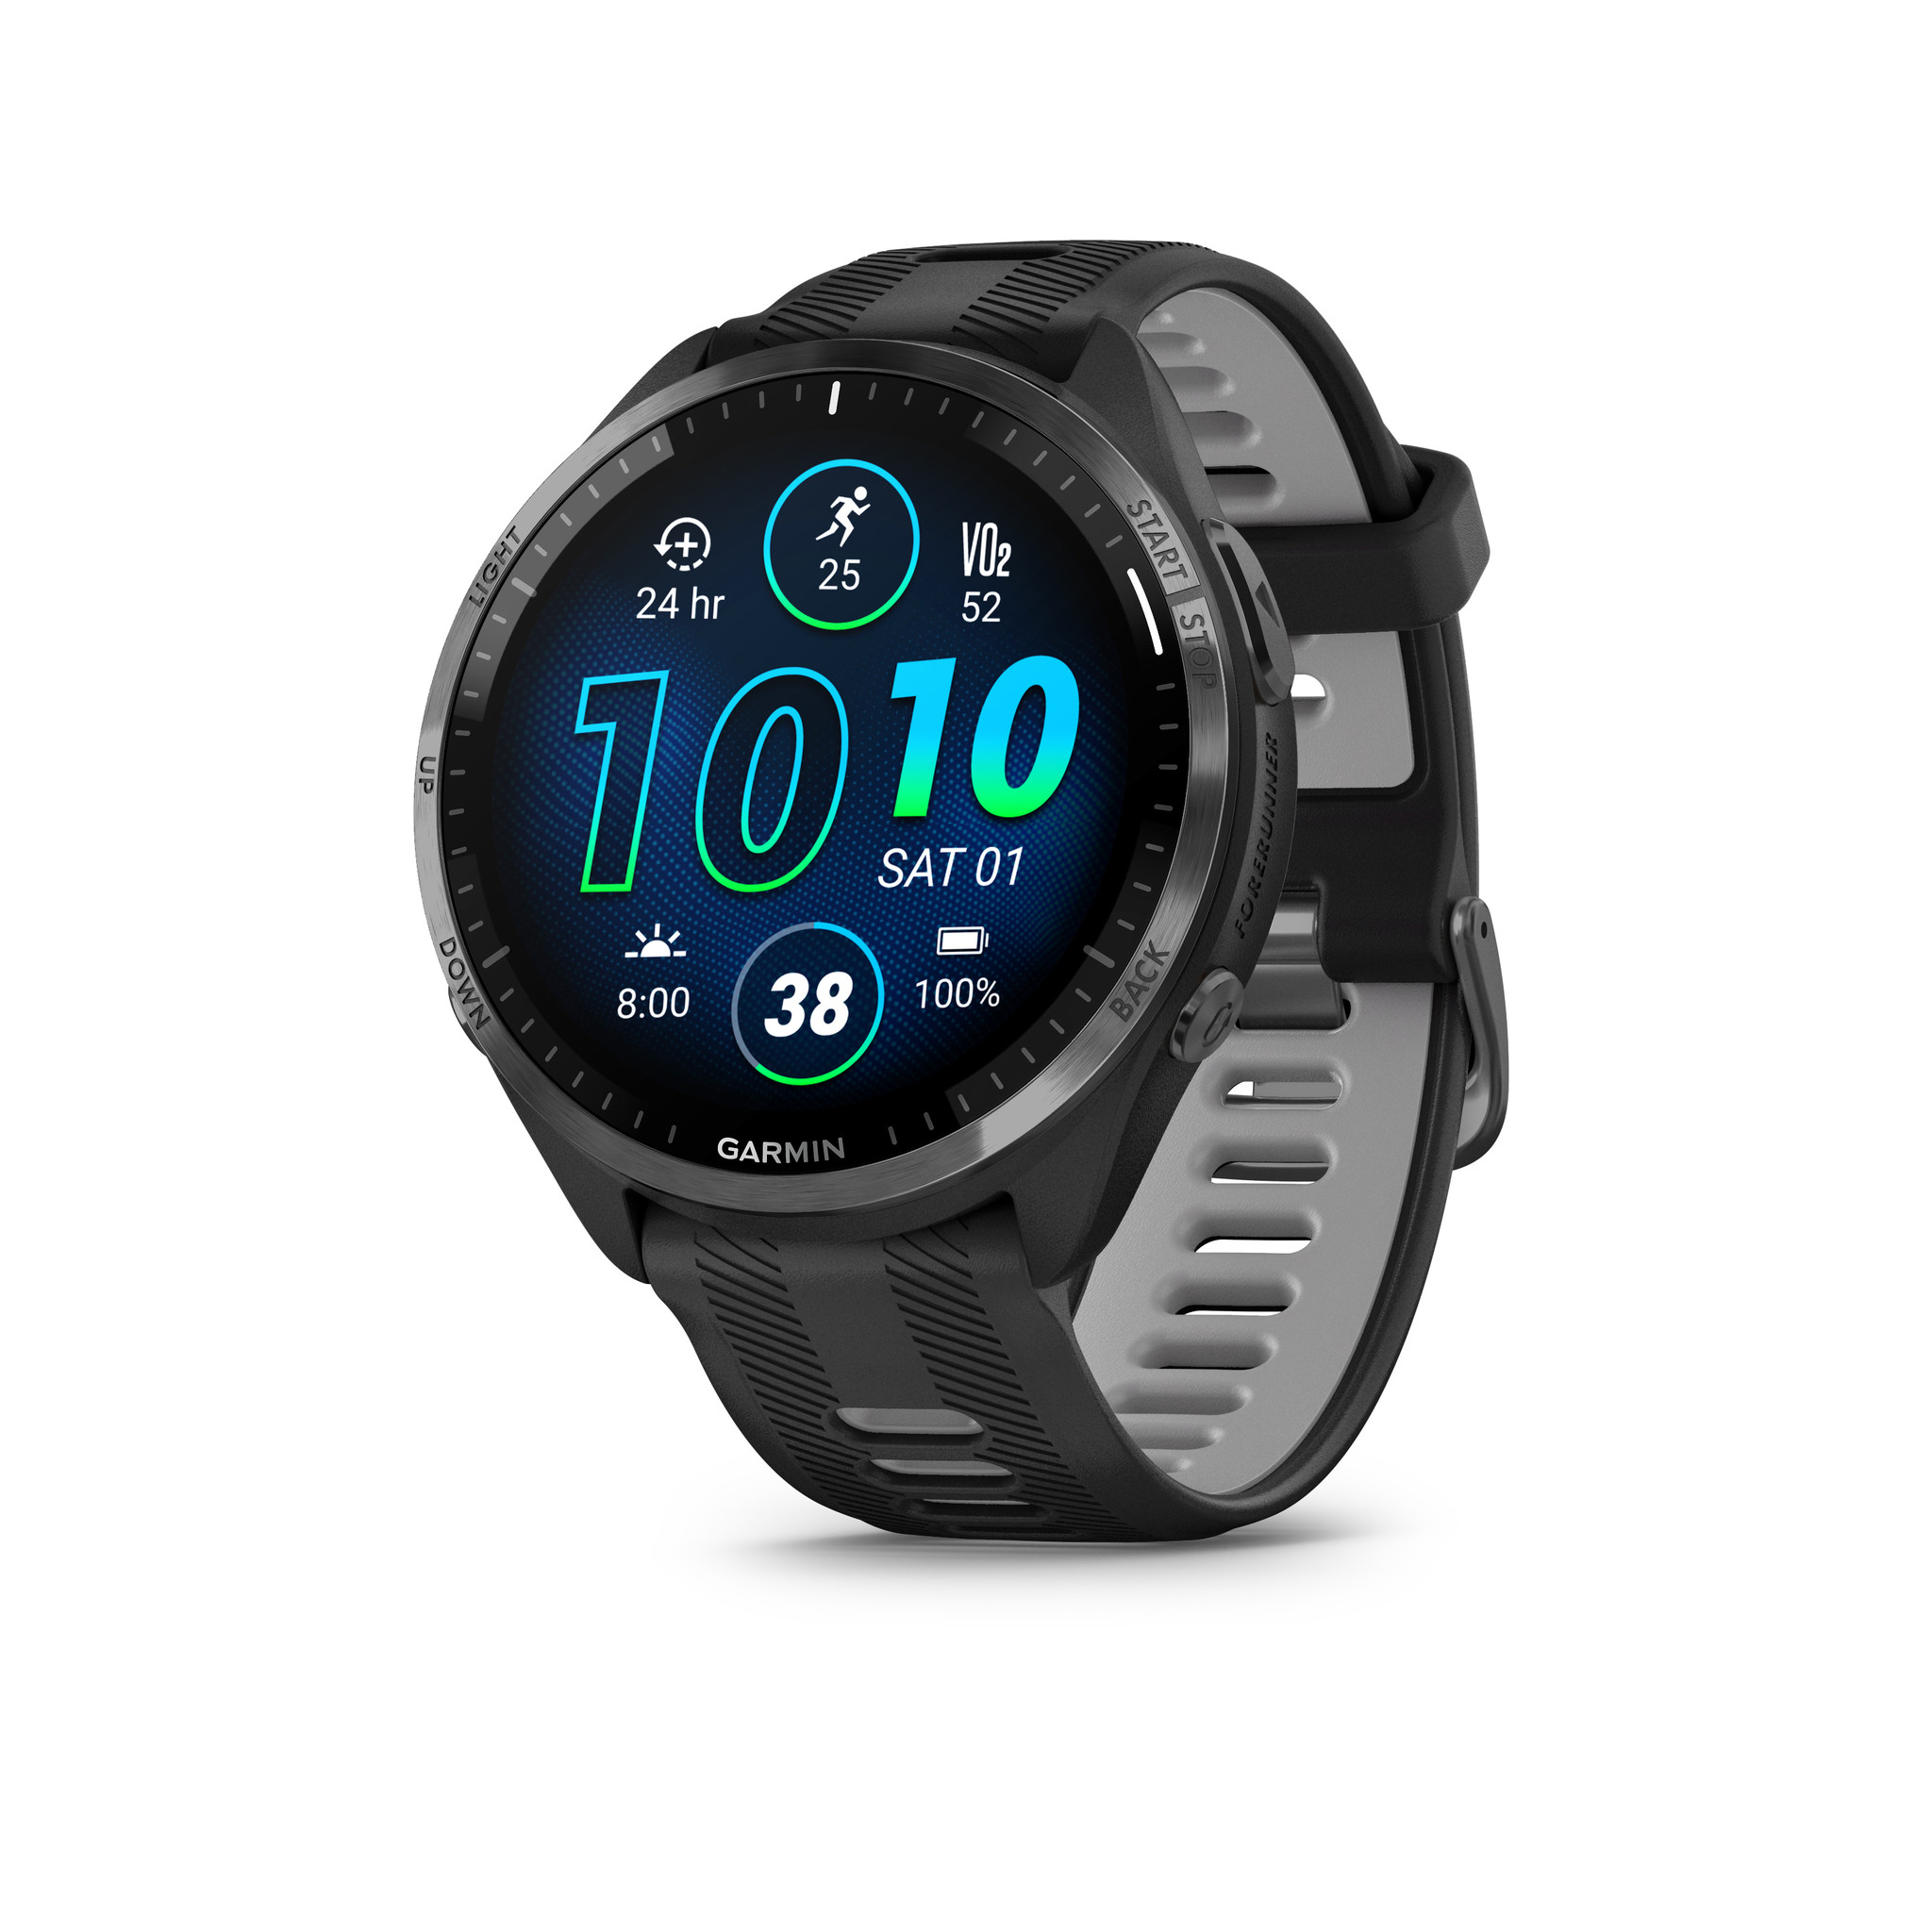 Garmin launches new forerunner 45, 245 and 945 GPS running watches